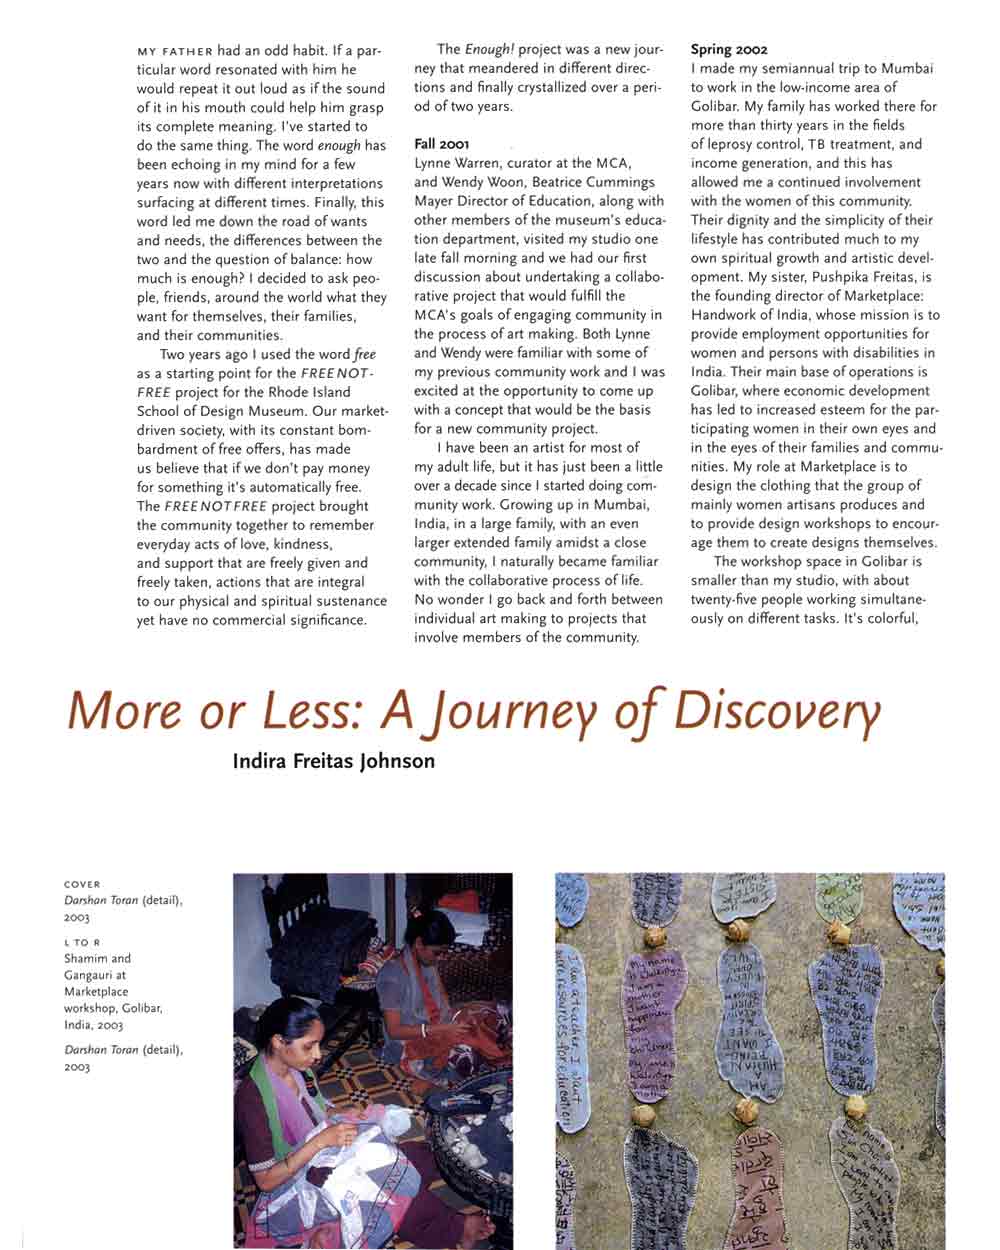 More or Less: A Journey of Discovery, essay, pg 1